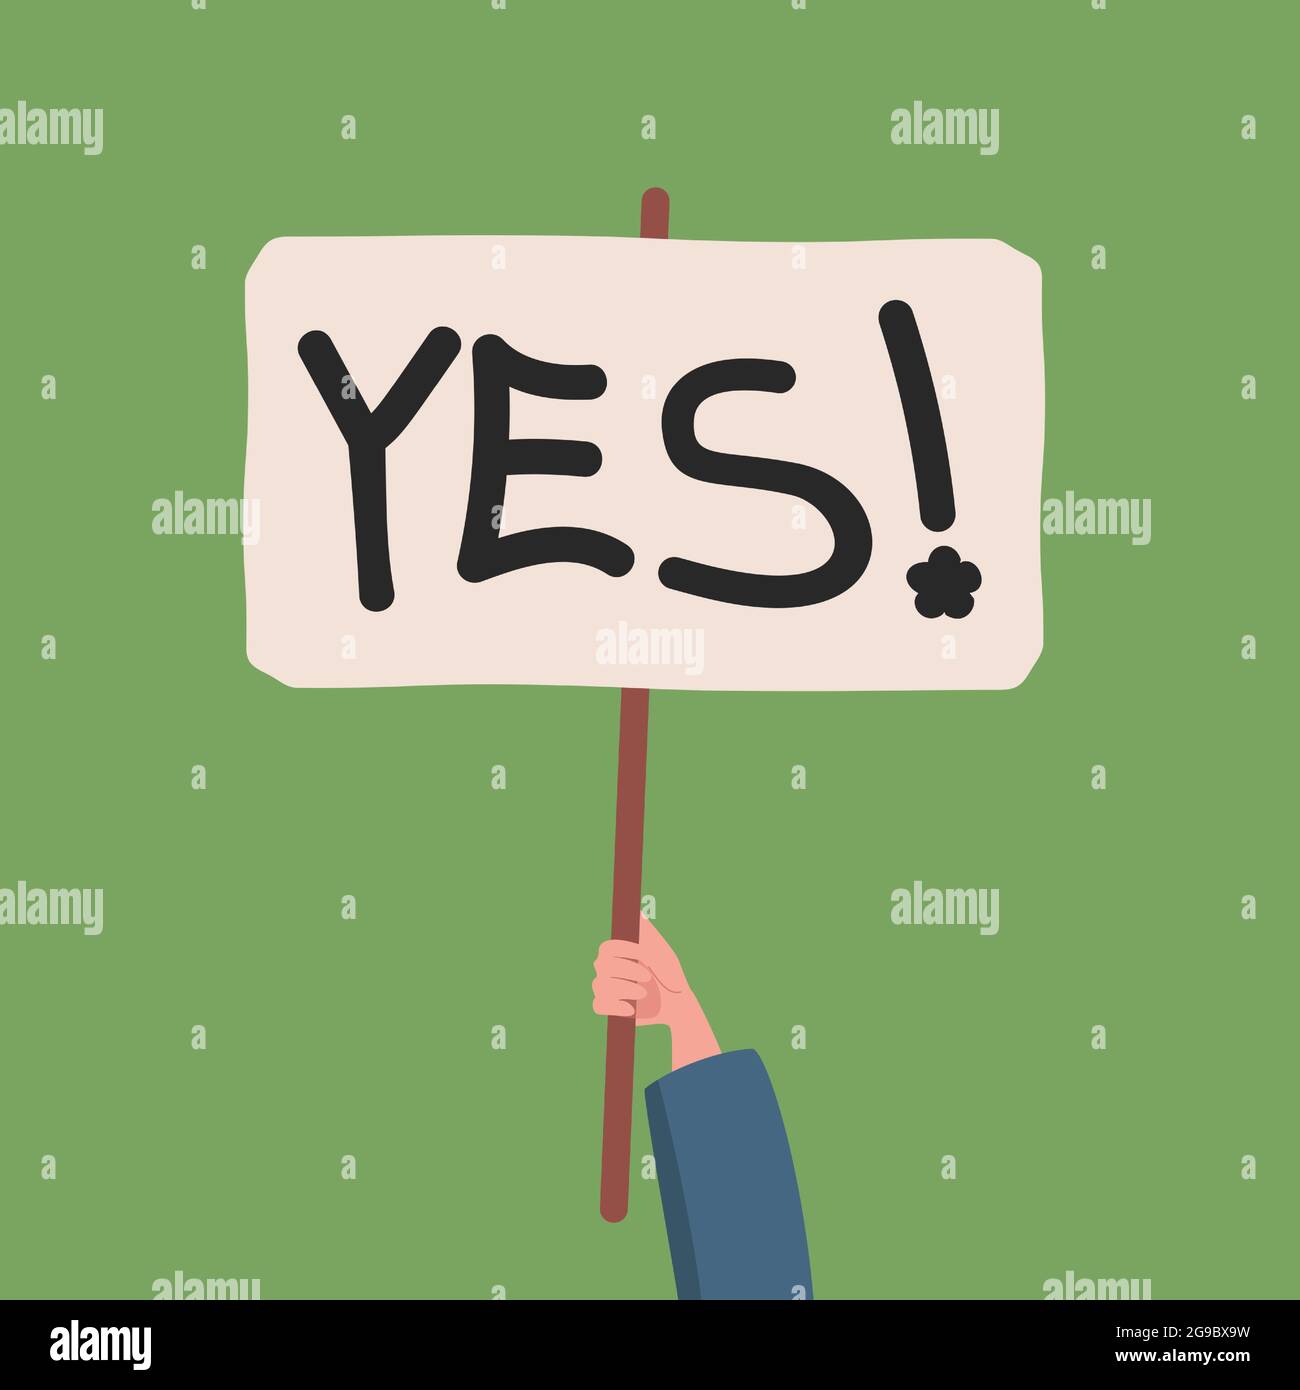 Hand holding banner with yes word vector flat illustration. Supporting something, voting positively, social movement, meeting, demonstration, activism concept. Human arm with poster. Stock Vector